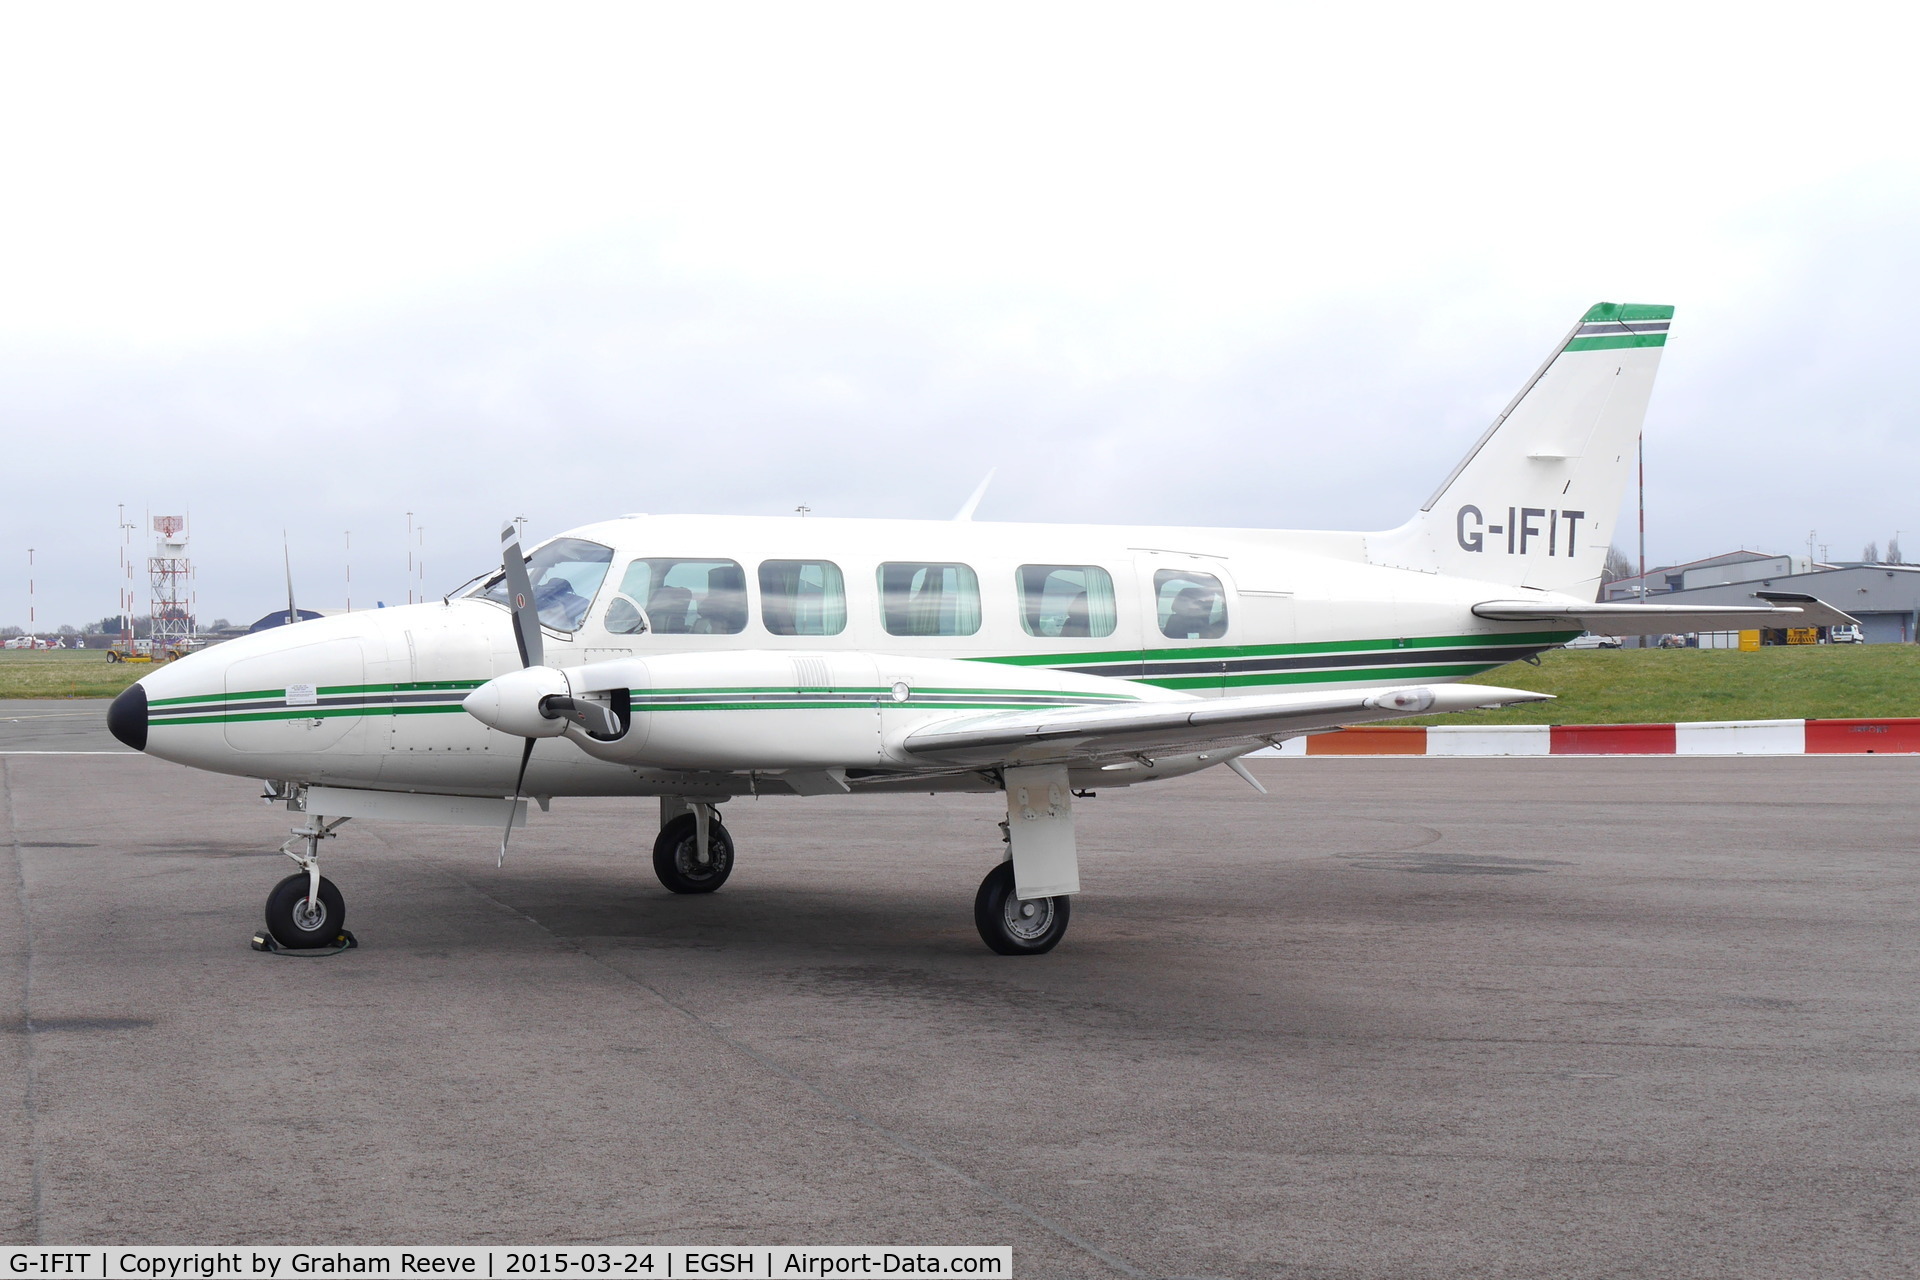 G-IFIT, 1980 Piper PA-31-350 Chieftain C/N 31-8052078, Parked at Norwich.